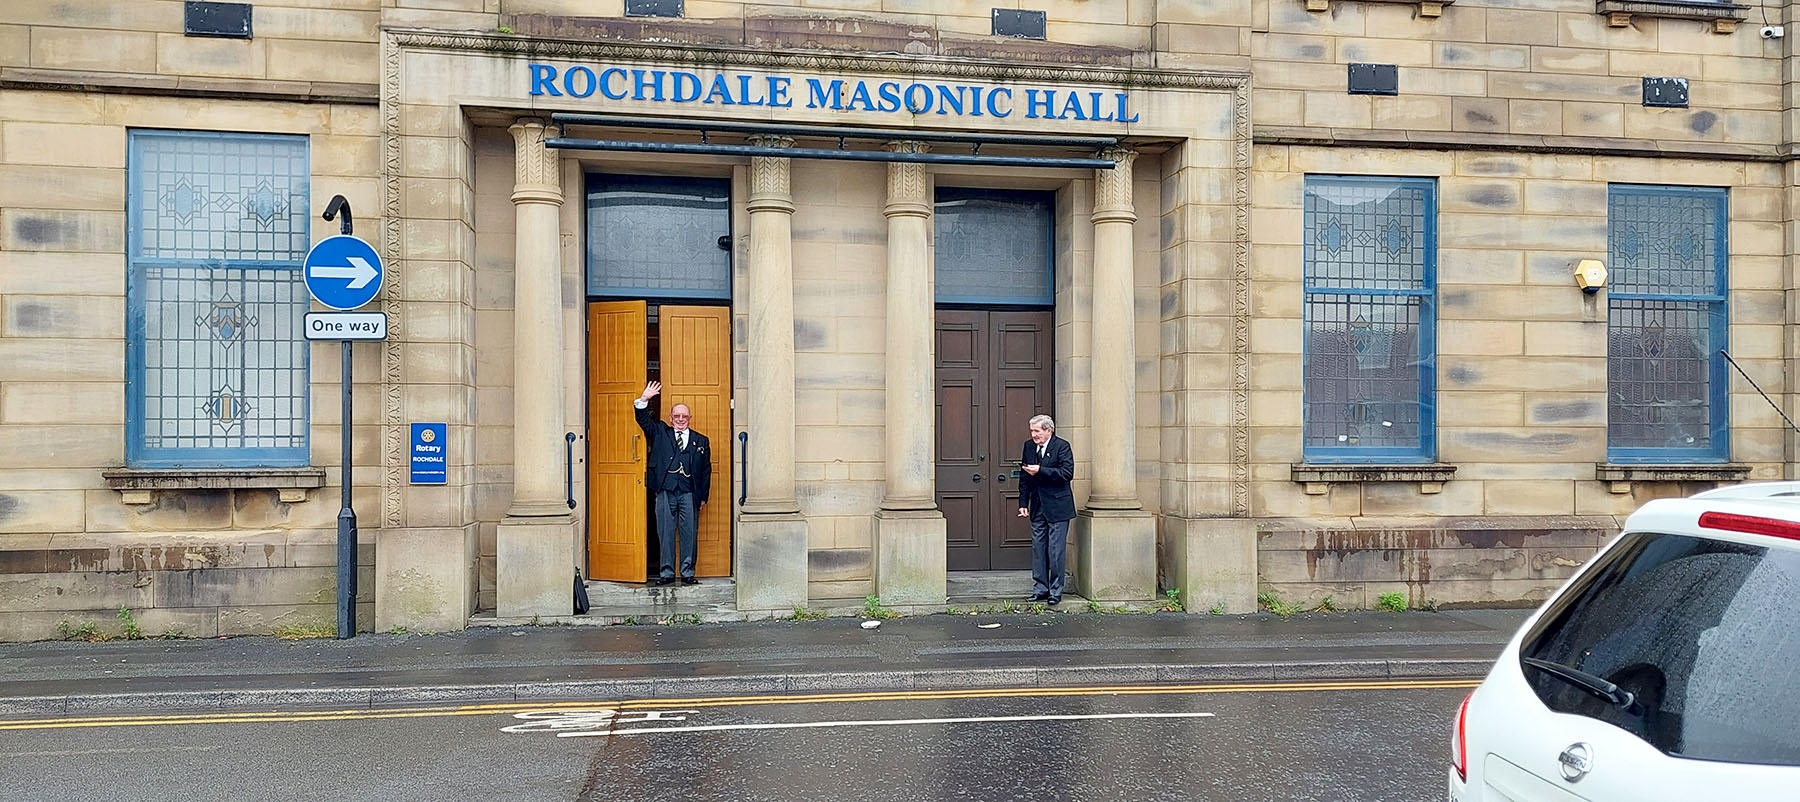 A warm welcome from R.W.Bro Brian Butterfield at the Rochdale Masonic Hall